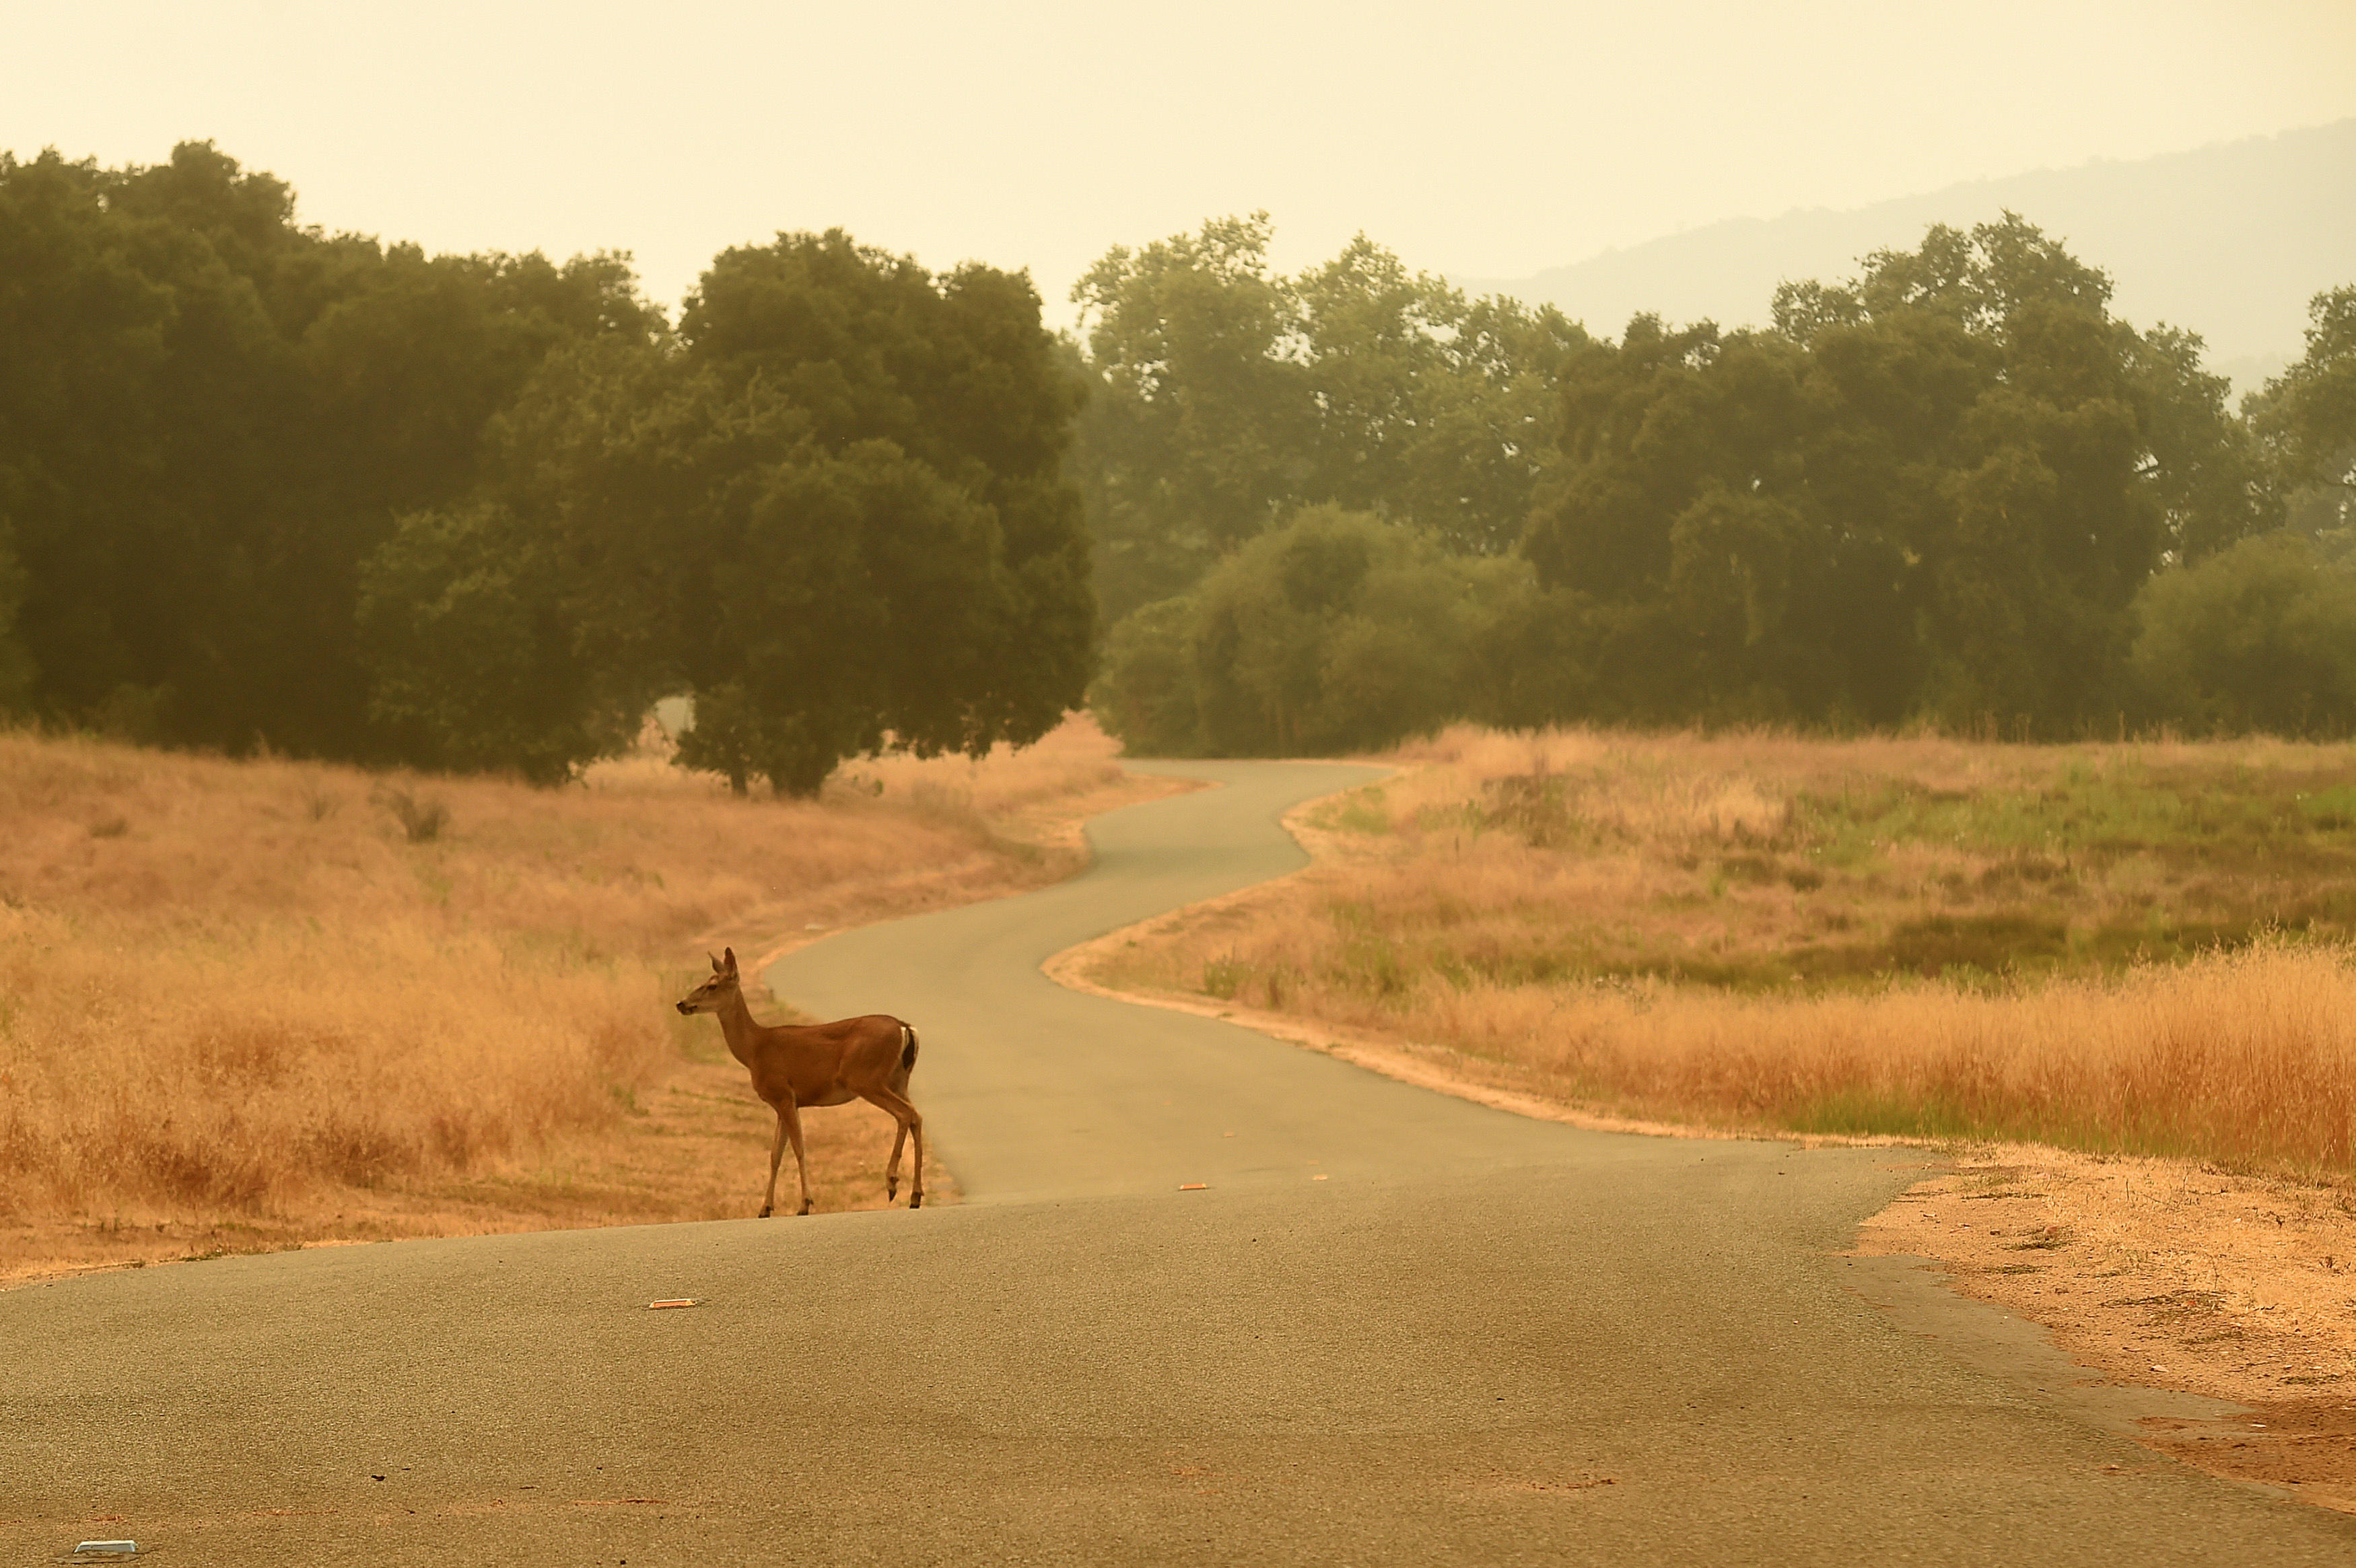 How do animals cross the road? Wildlife survey discovers it's